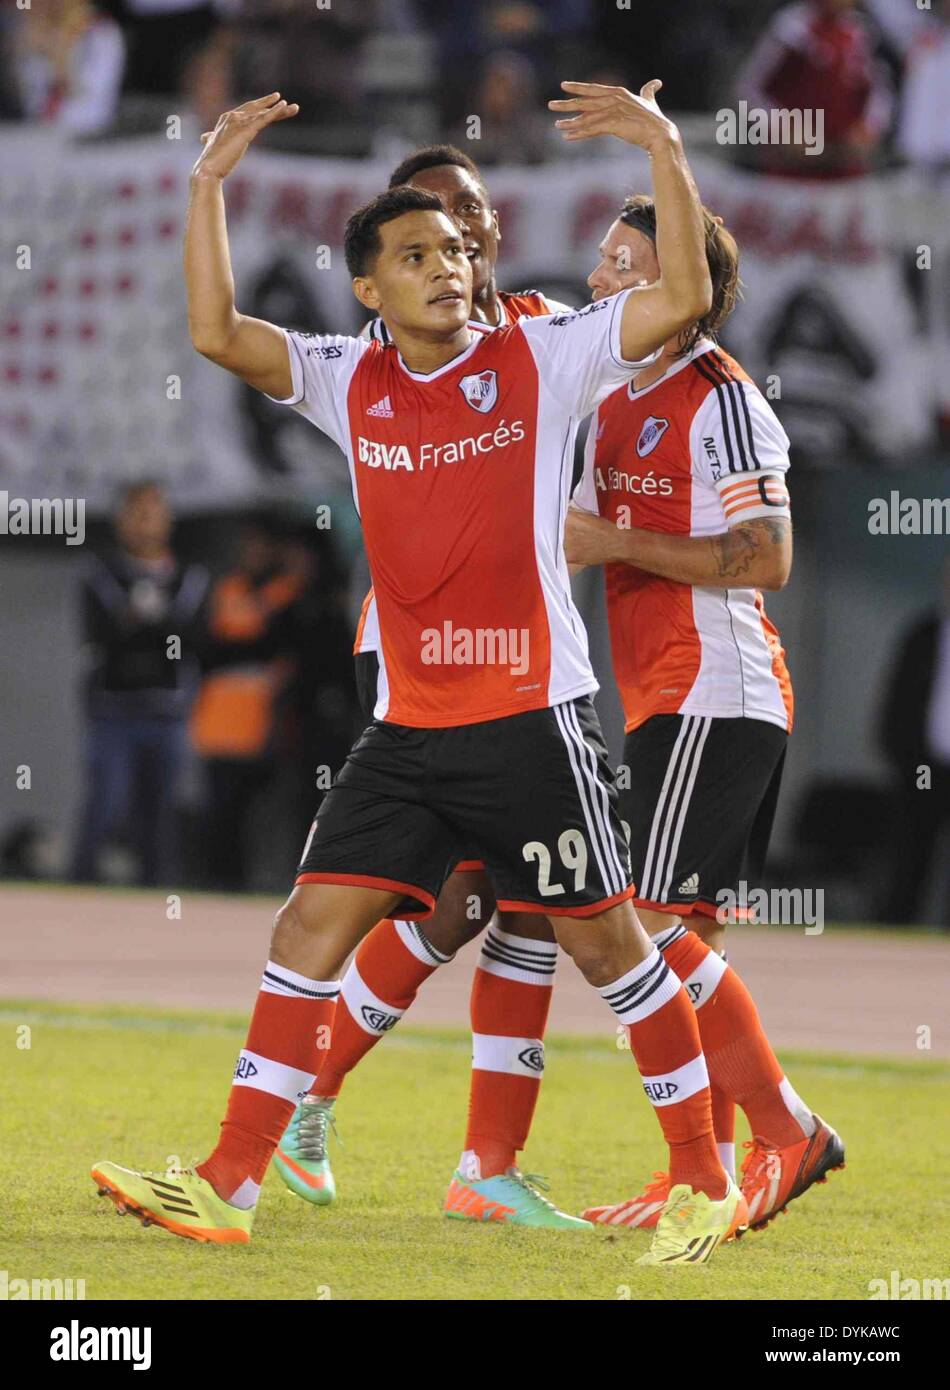 Buenos Aires, Argentina. 20th Apr, 2014. River Plate's player Teofilo Gutierrez(FRONT) celebrates scoring during a Final Tournament 2014 match against Velez Sarsfield in Buenos Aires, Argentina, April 20, 2014. © Maximiliano Luna/TELAM/Xinhua/Alamy Live News Stock Photo